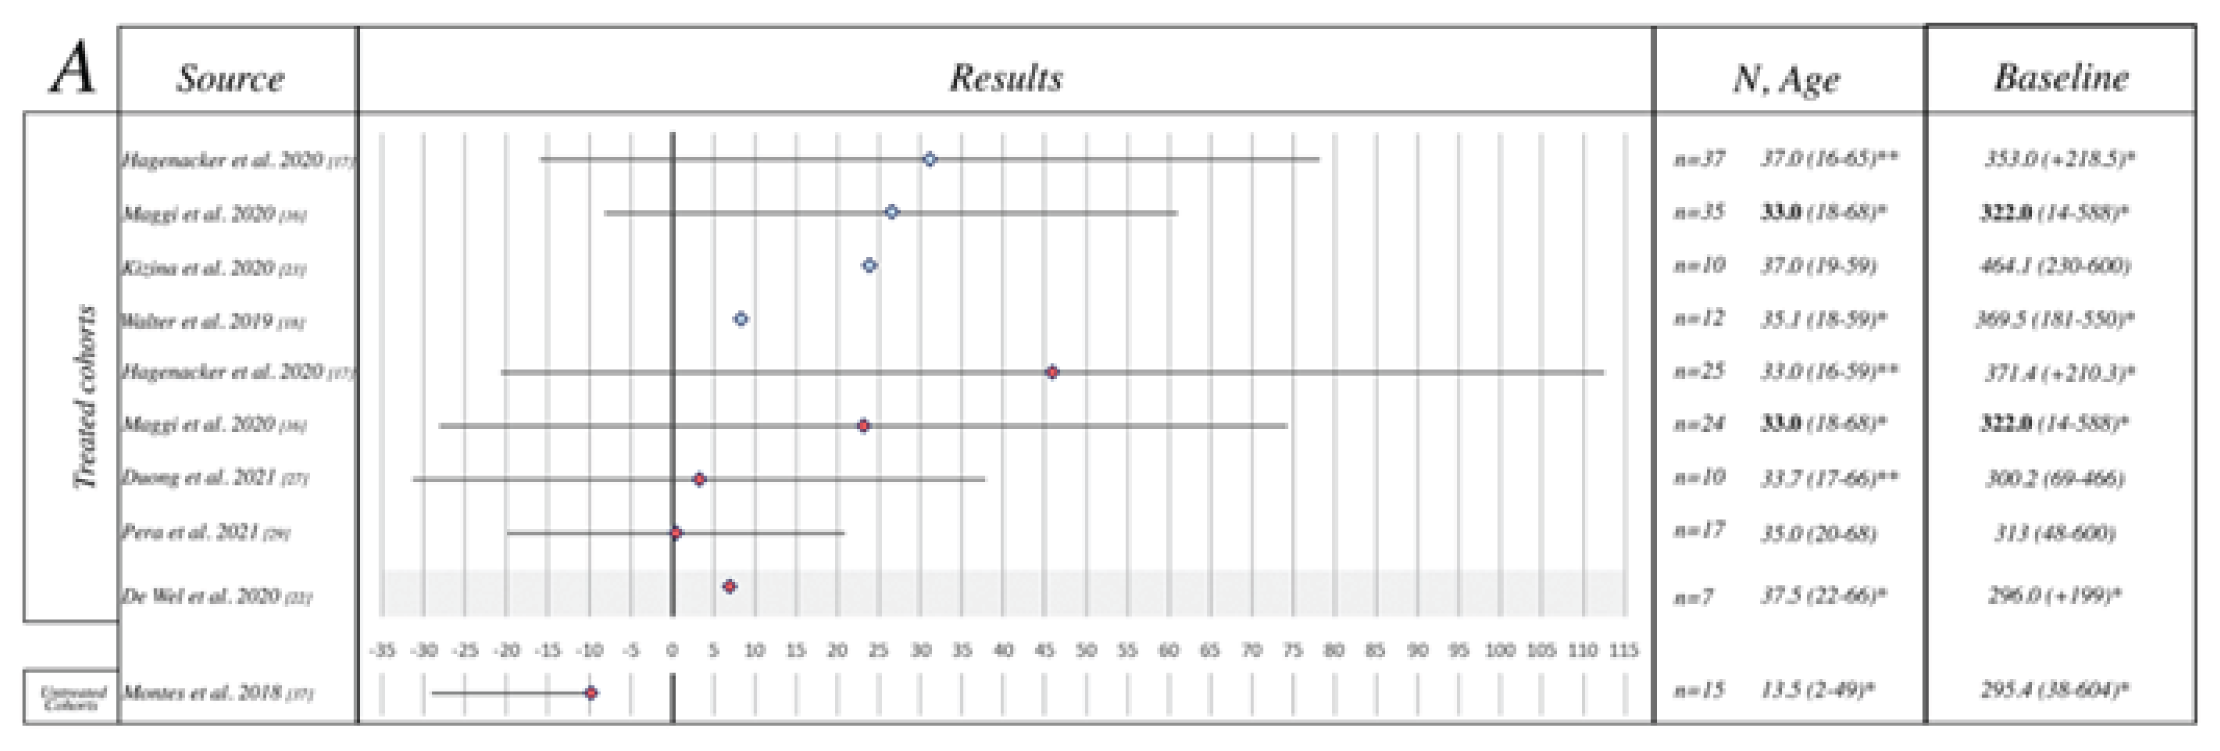 Forest plot of the individual study results for included studies for the change from baseline in 6MWT score for treated adult cohorts and for untreated adult cohorts with type II or III SMA. In general, for the treated adult cohort, all point estimates were greater than 0, suggesting improvements in 6MWT over time; however, the 95% CIs were wide, crossing the zero meridian. In the untreated cohort, only 1 study was included, and the change from baseline was below 0, suggesting a decrease in 6MWT score from baseline.